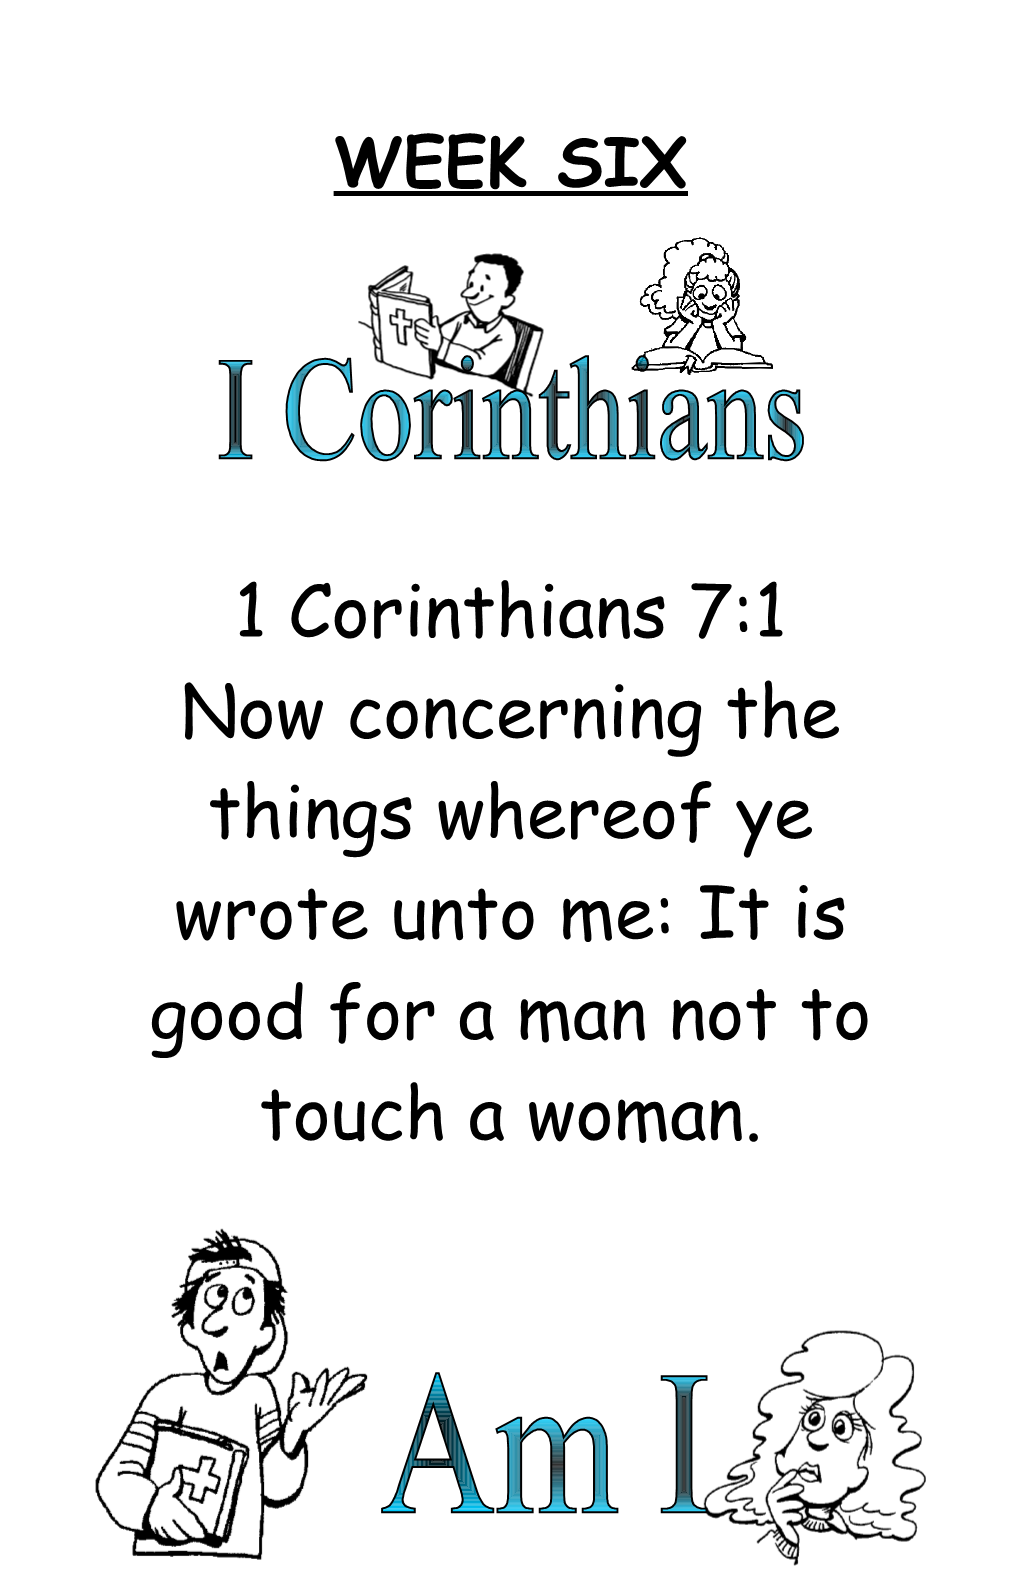 Now Concerning the Things Whereof Ye Wrote Unto Me: It Is Good for a Man Not to Touch a Woman